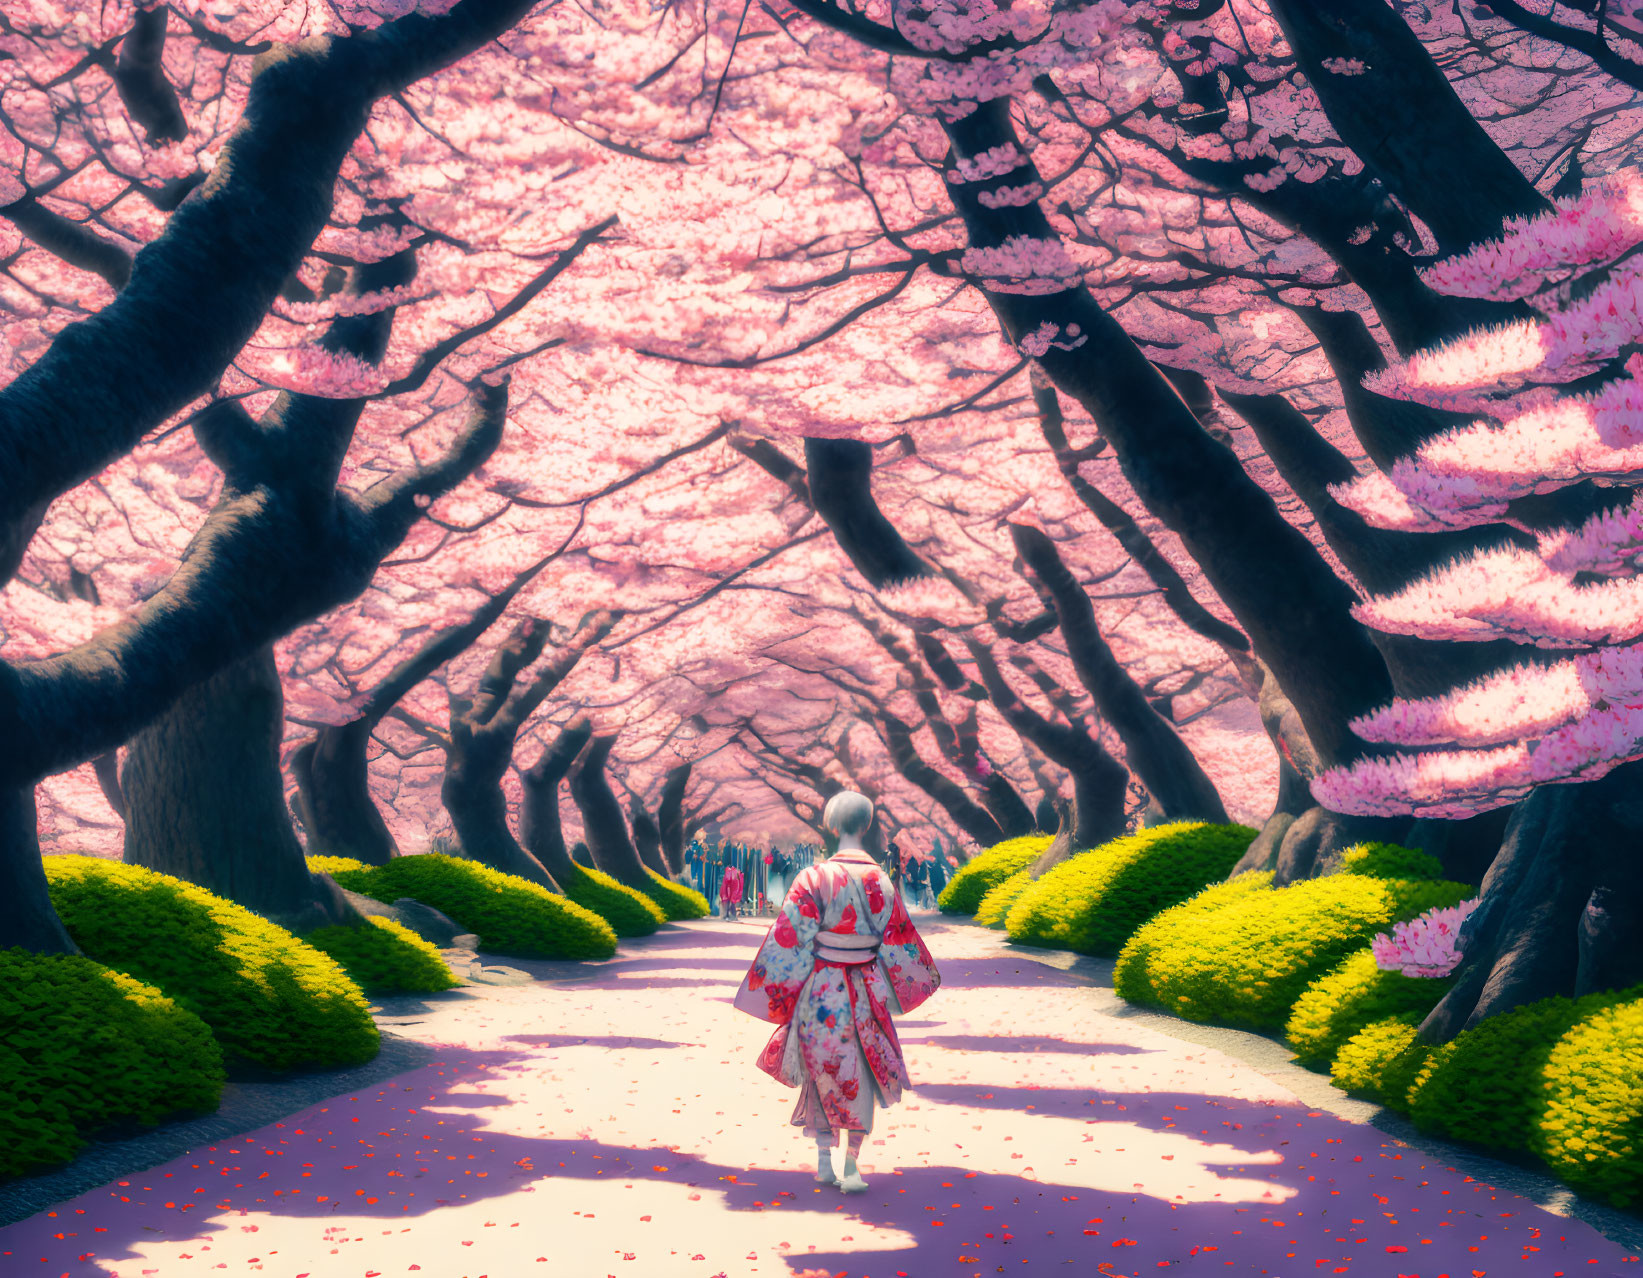 Person in Traditional Attire Walking Among Pink Cherry Blossoms